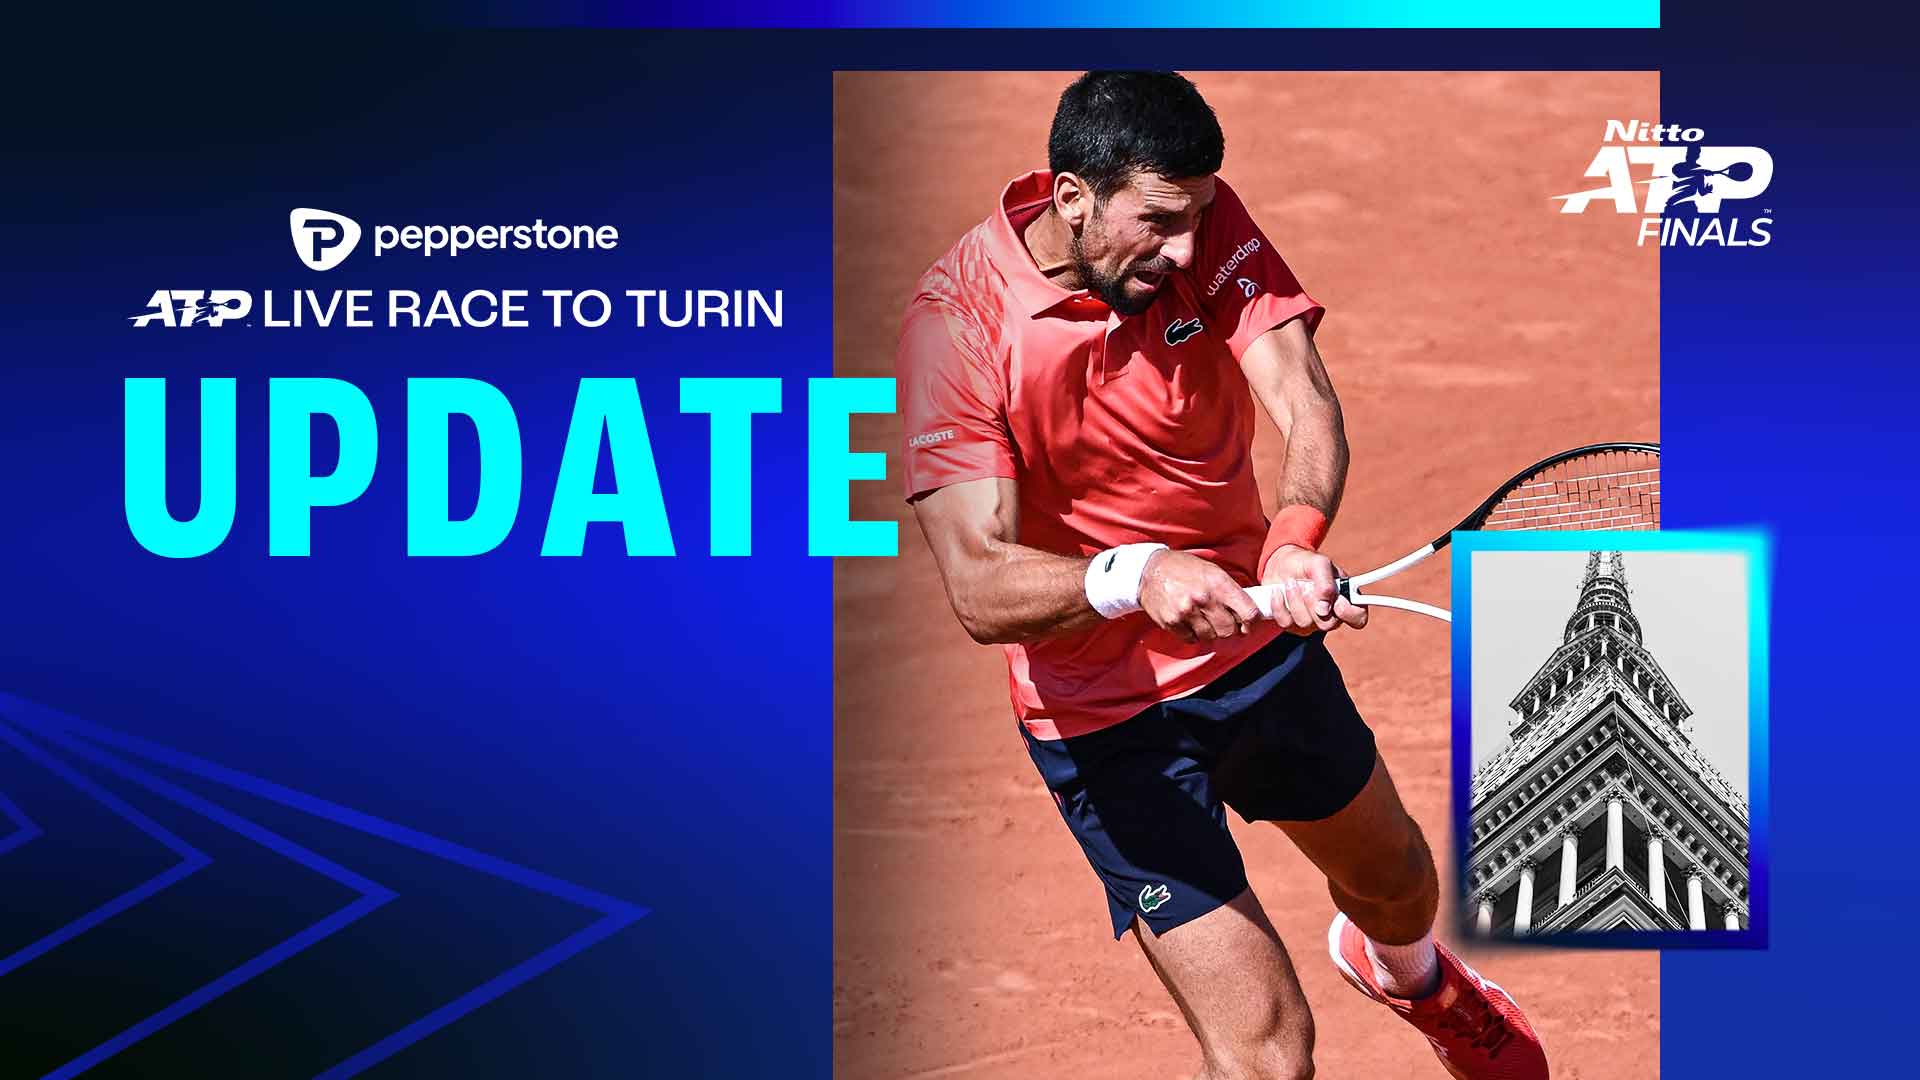 Novak Djokovic climbs to first in the Pepperstone ATP Live Race To Turin after winning Roland Garros.